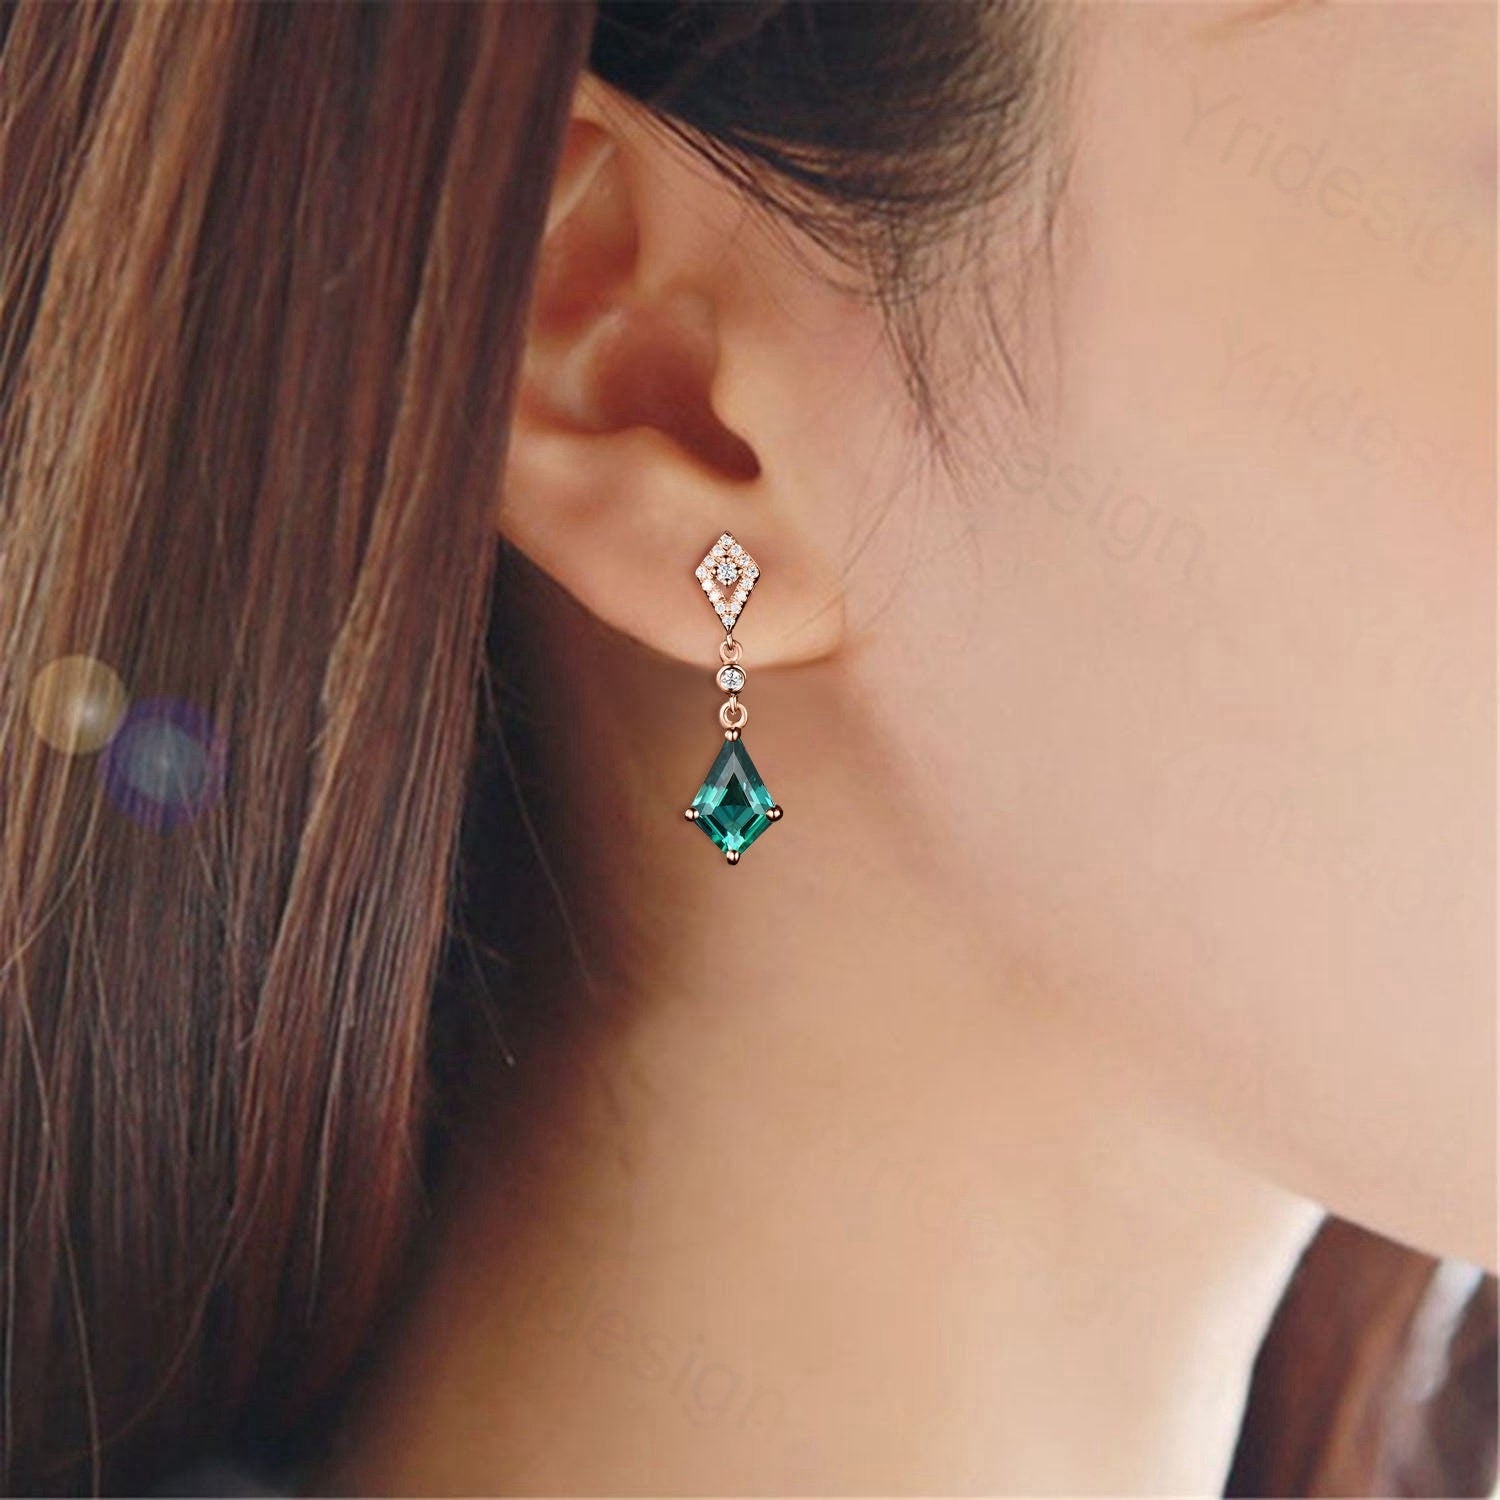 Antique kite cut emerald earrings white gold halo diamond drop stud earrings women vintage dainty lab emerald  anniversary gift for her - PENFINE